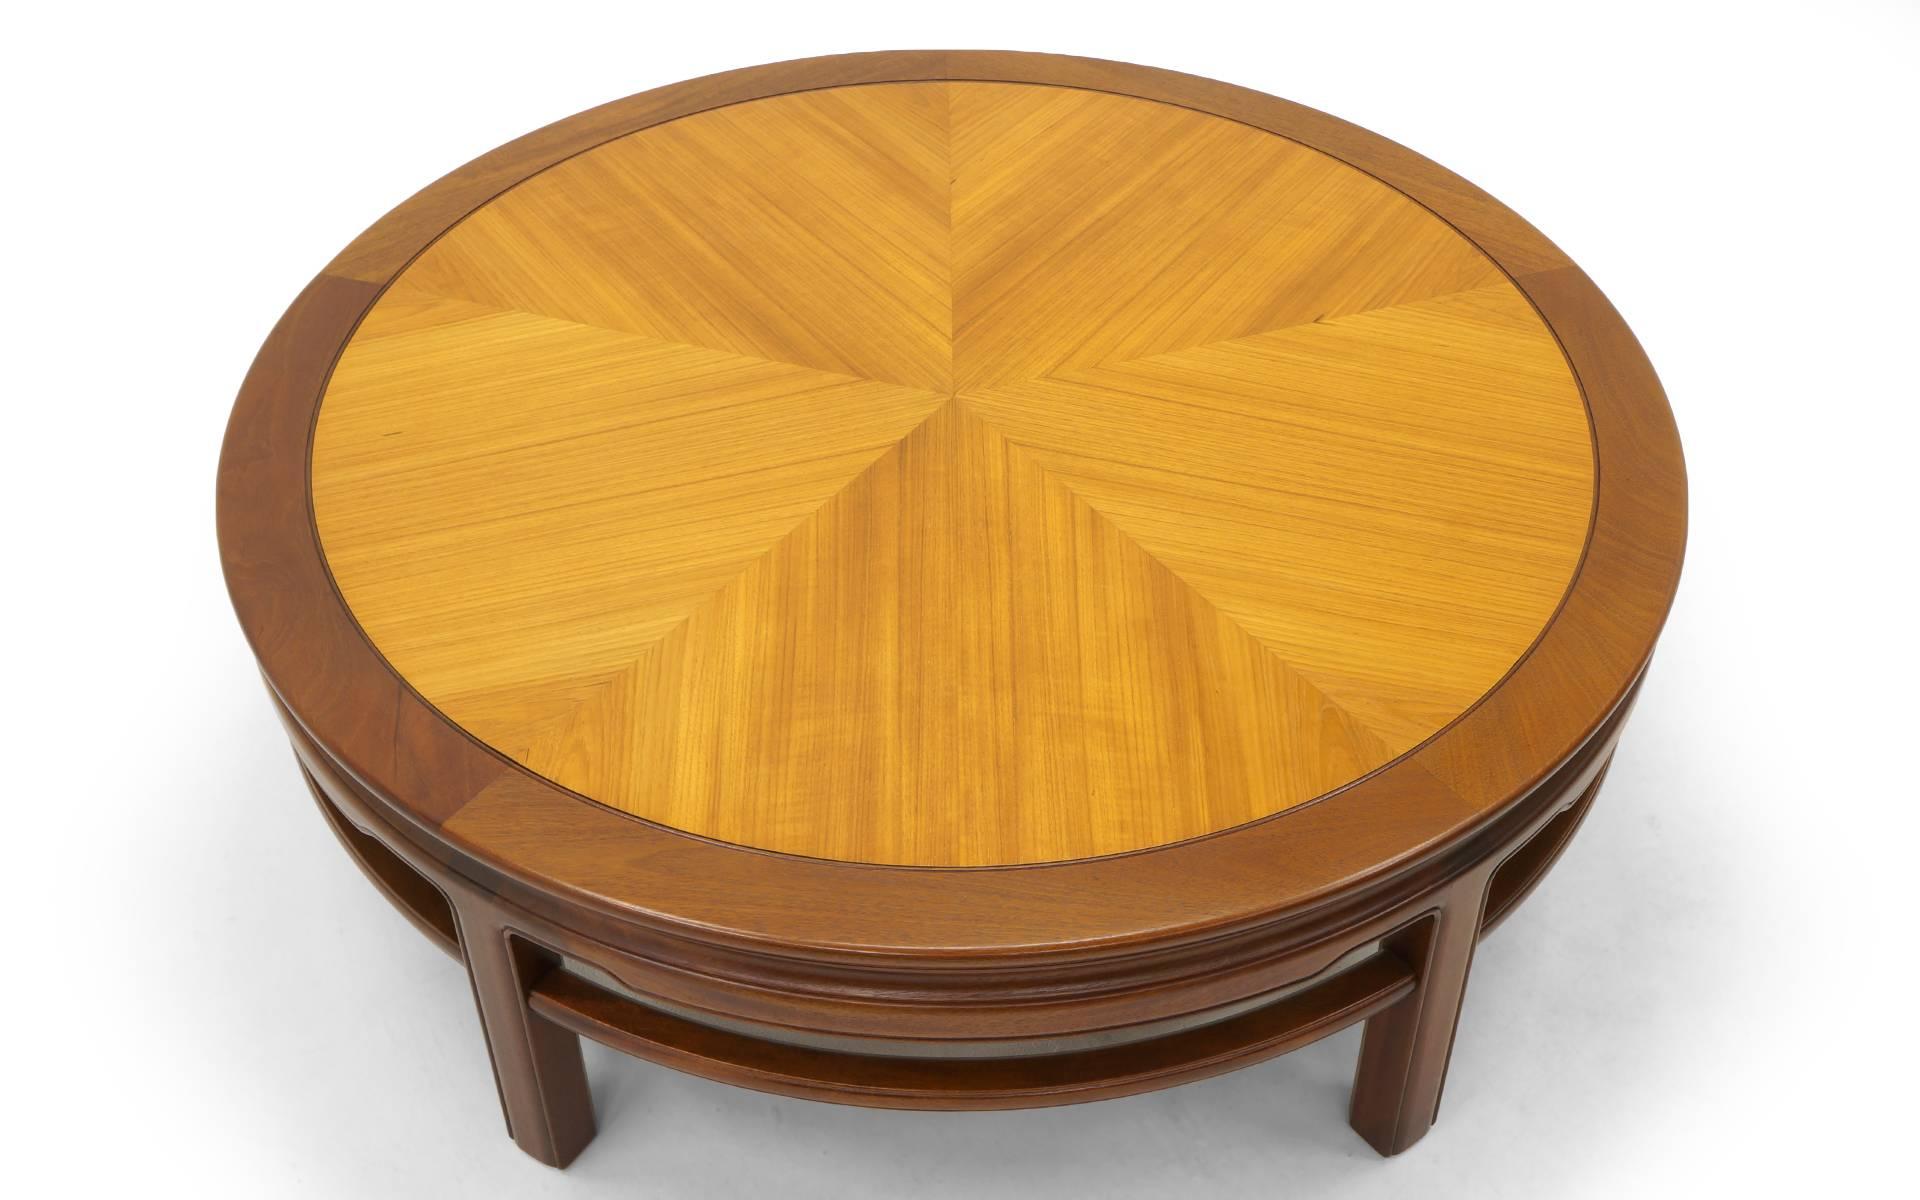 American Round Coffee Table by Kittinger, Two-Toned Teak and Mahogany, Expertly Restored